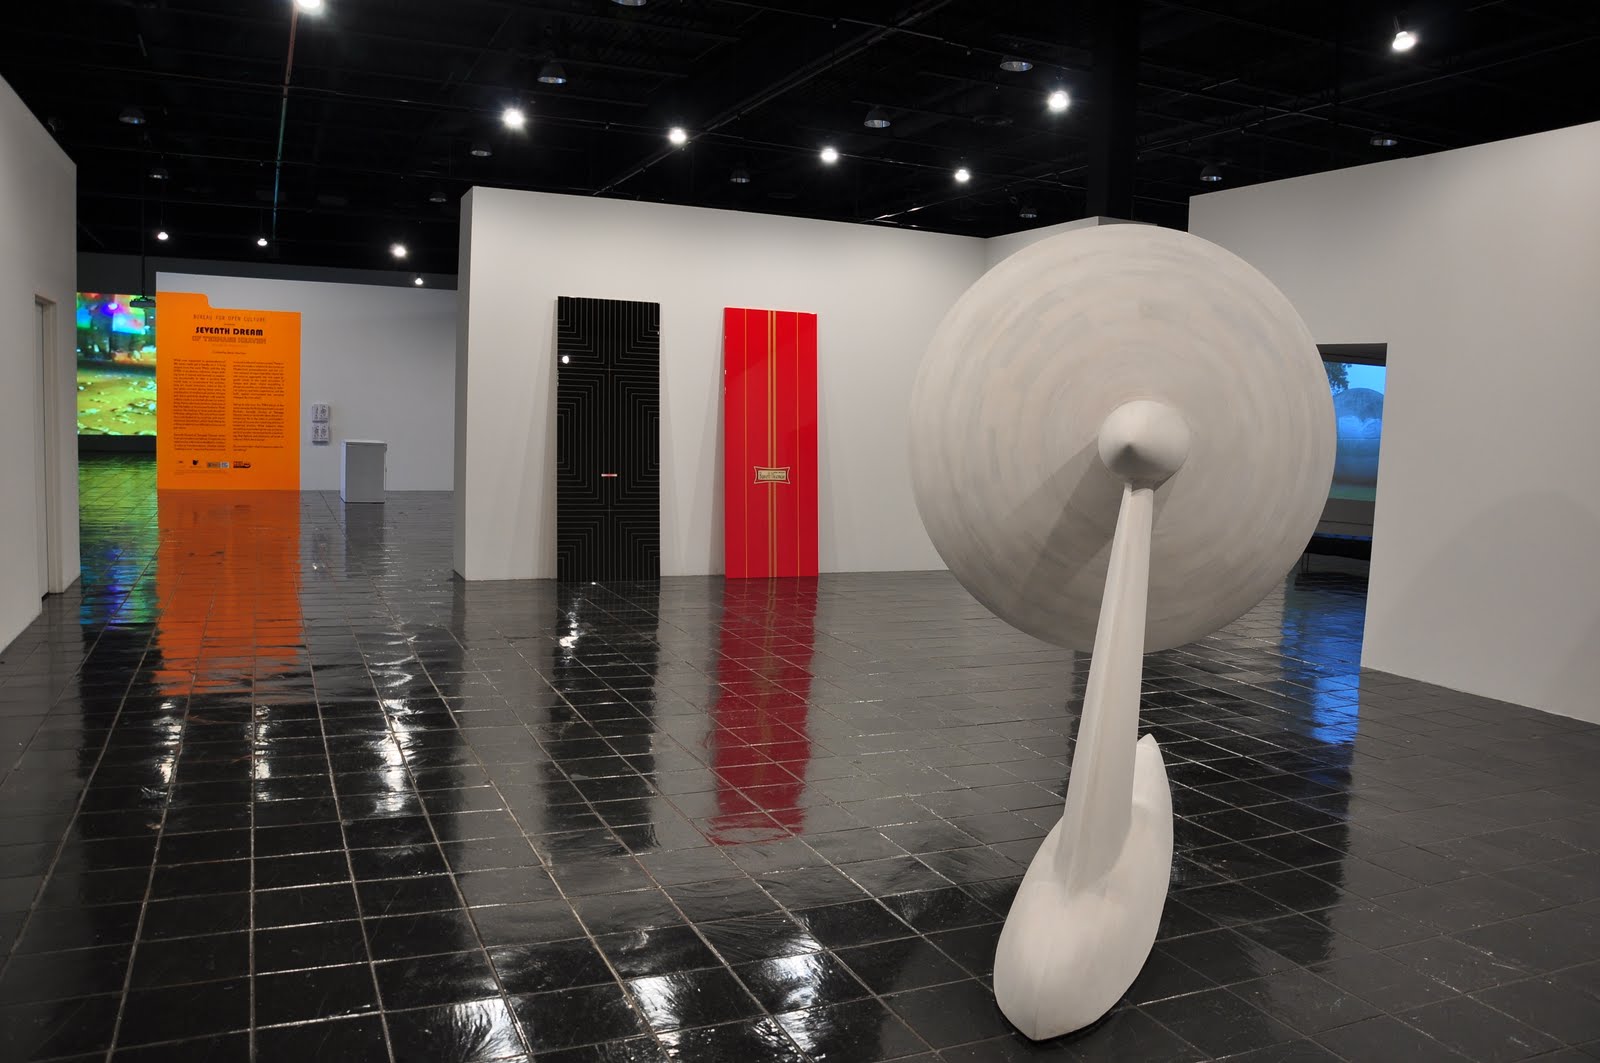  Malcolm Cochran,  History Lessons , 2011, poplar, steel, stainless steel, whitewash, 8 x 6 x 10 feet. Peter Dayton,  Stella #22 “Lost World , ”  2008 and  Barnett Newman #1, “Onement One , ”  2006, both 96 x 36 inches, oil, acrylic, resin and paper 